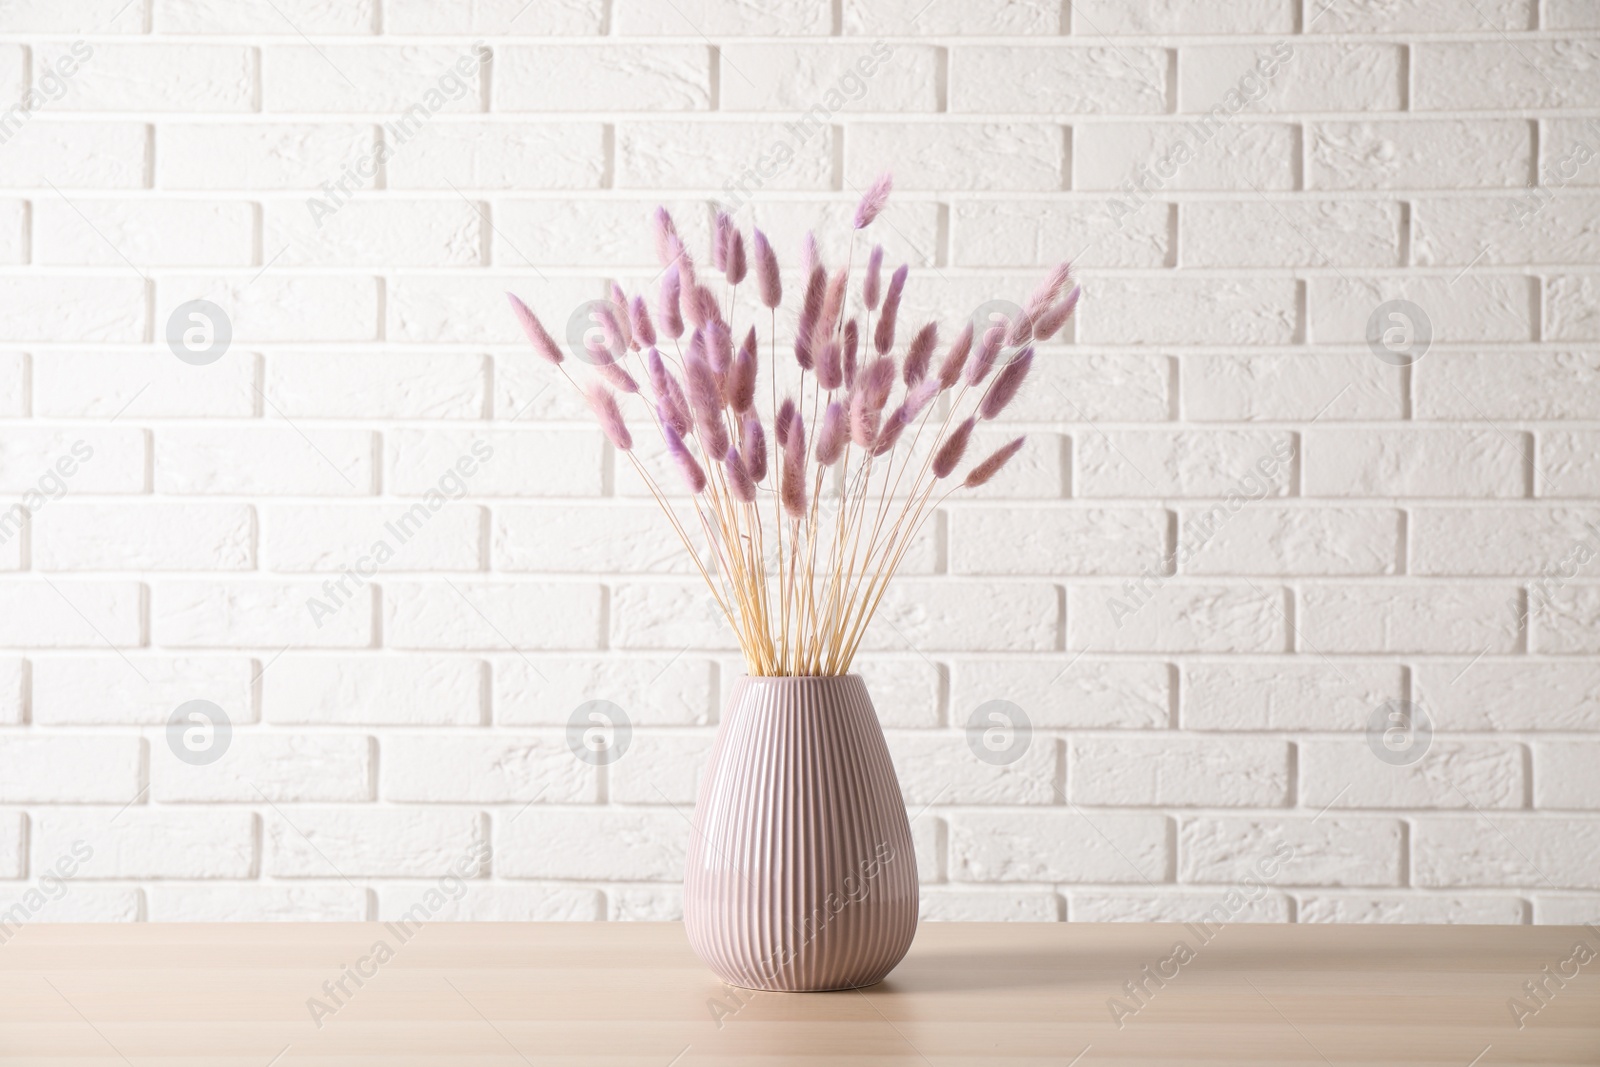 Photo of Dried flowers in vase on table against white brick wall